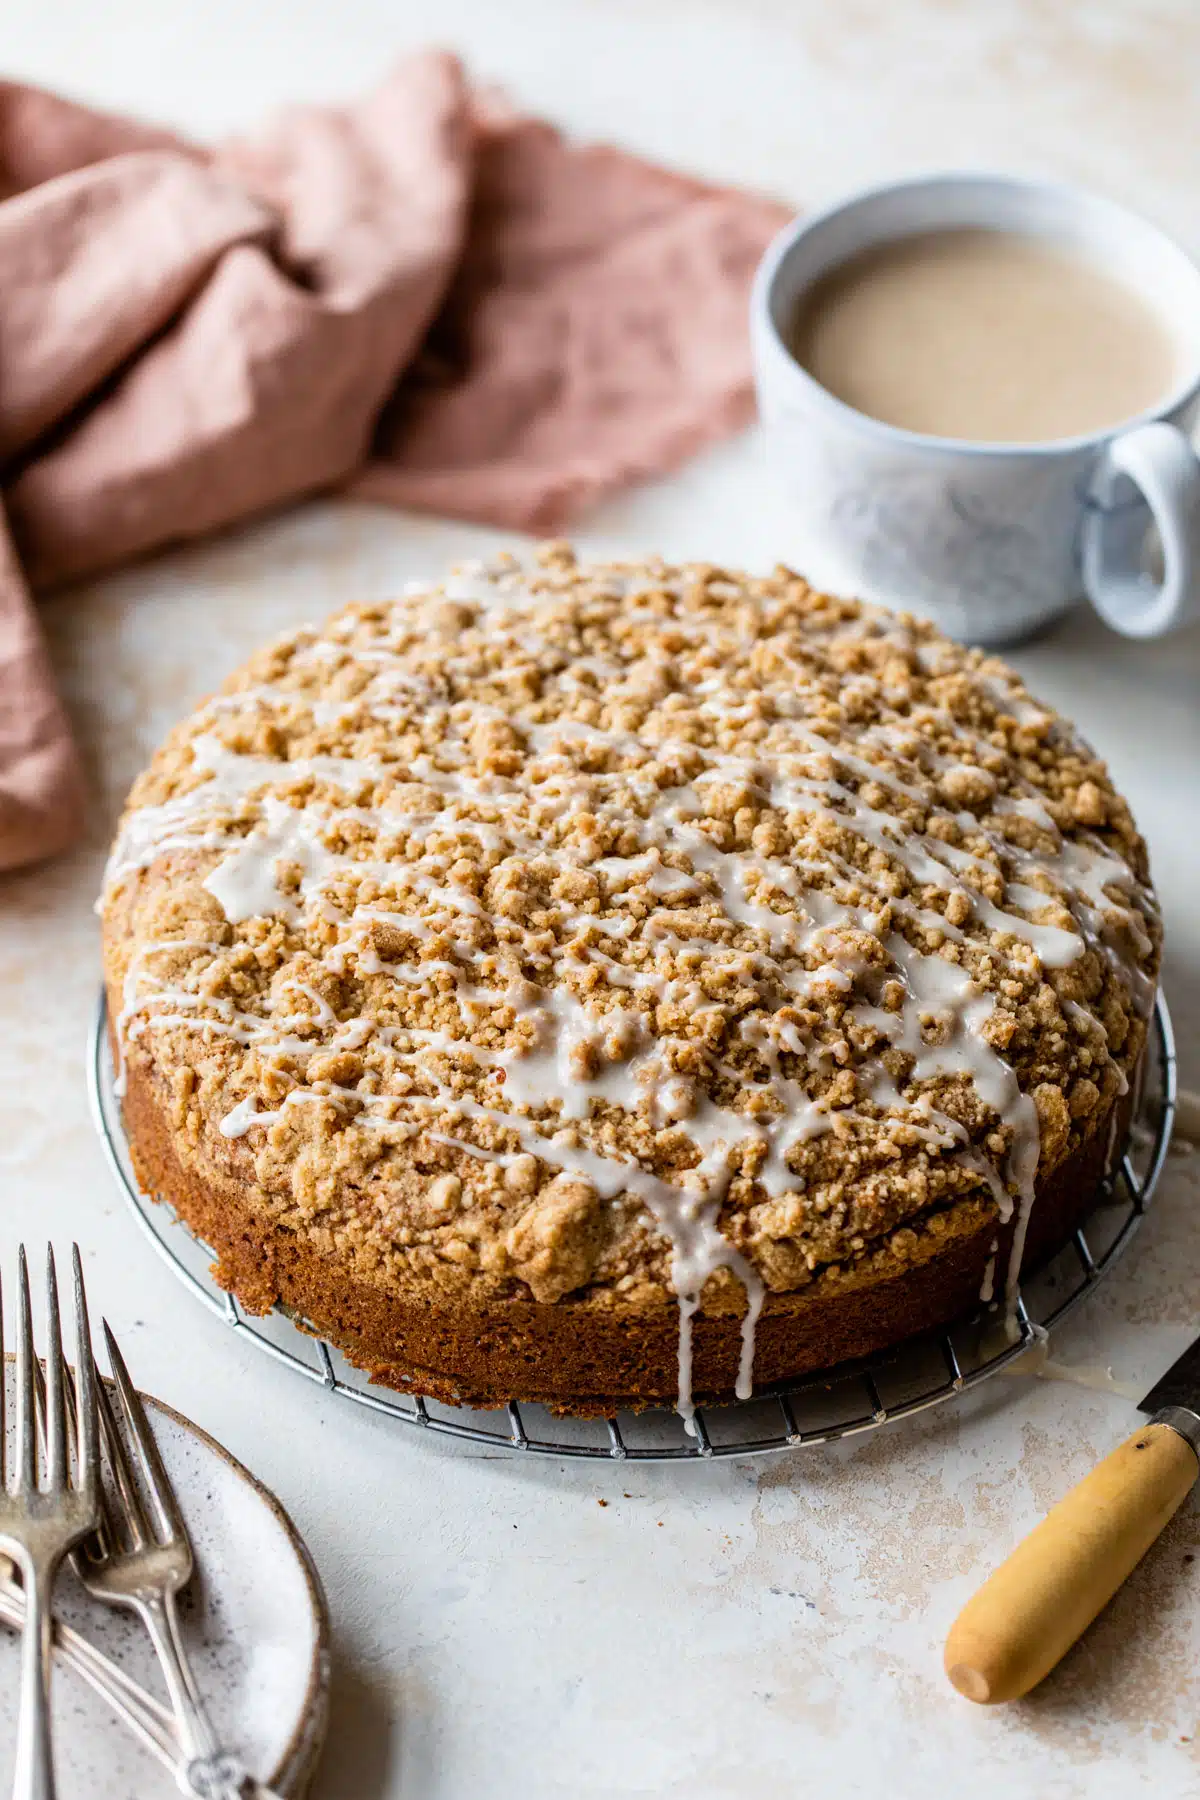 an overview of a whole vegan coffee cake with vanilla icing drizzled on top